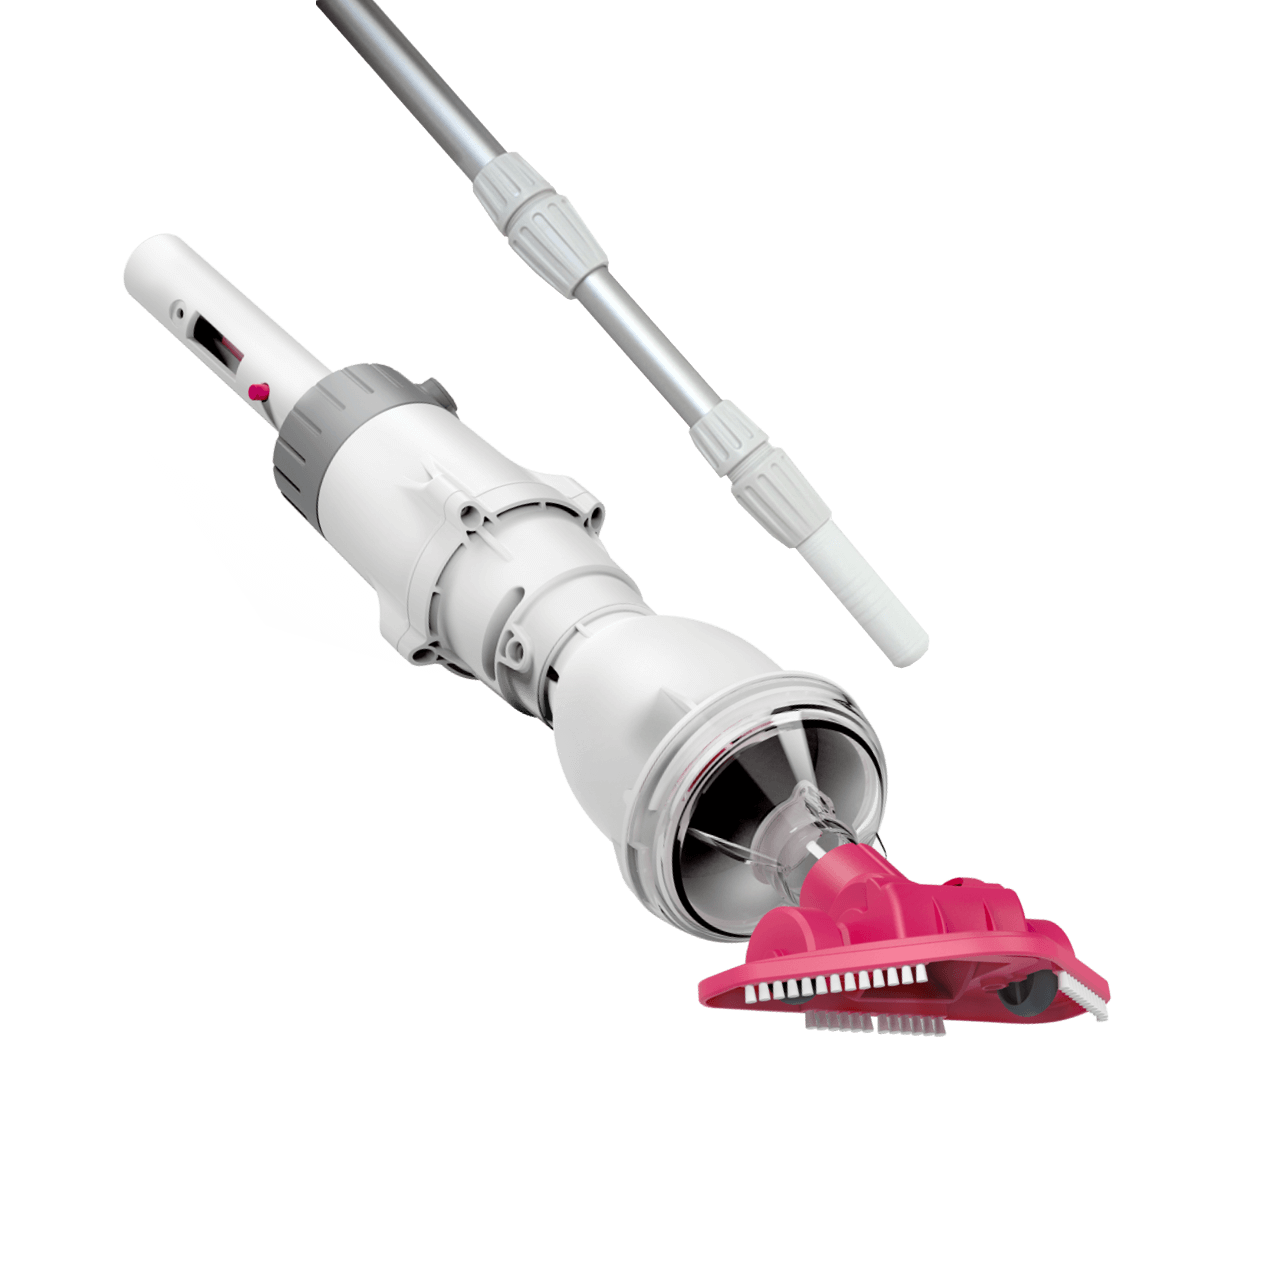 Damen brings together BWT BC02 pool vacuum cleaner and BWT telescopic rod